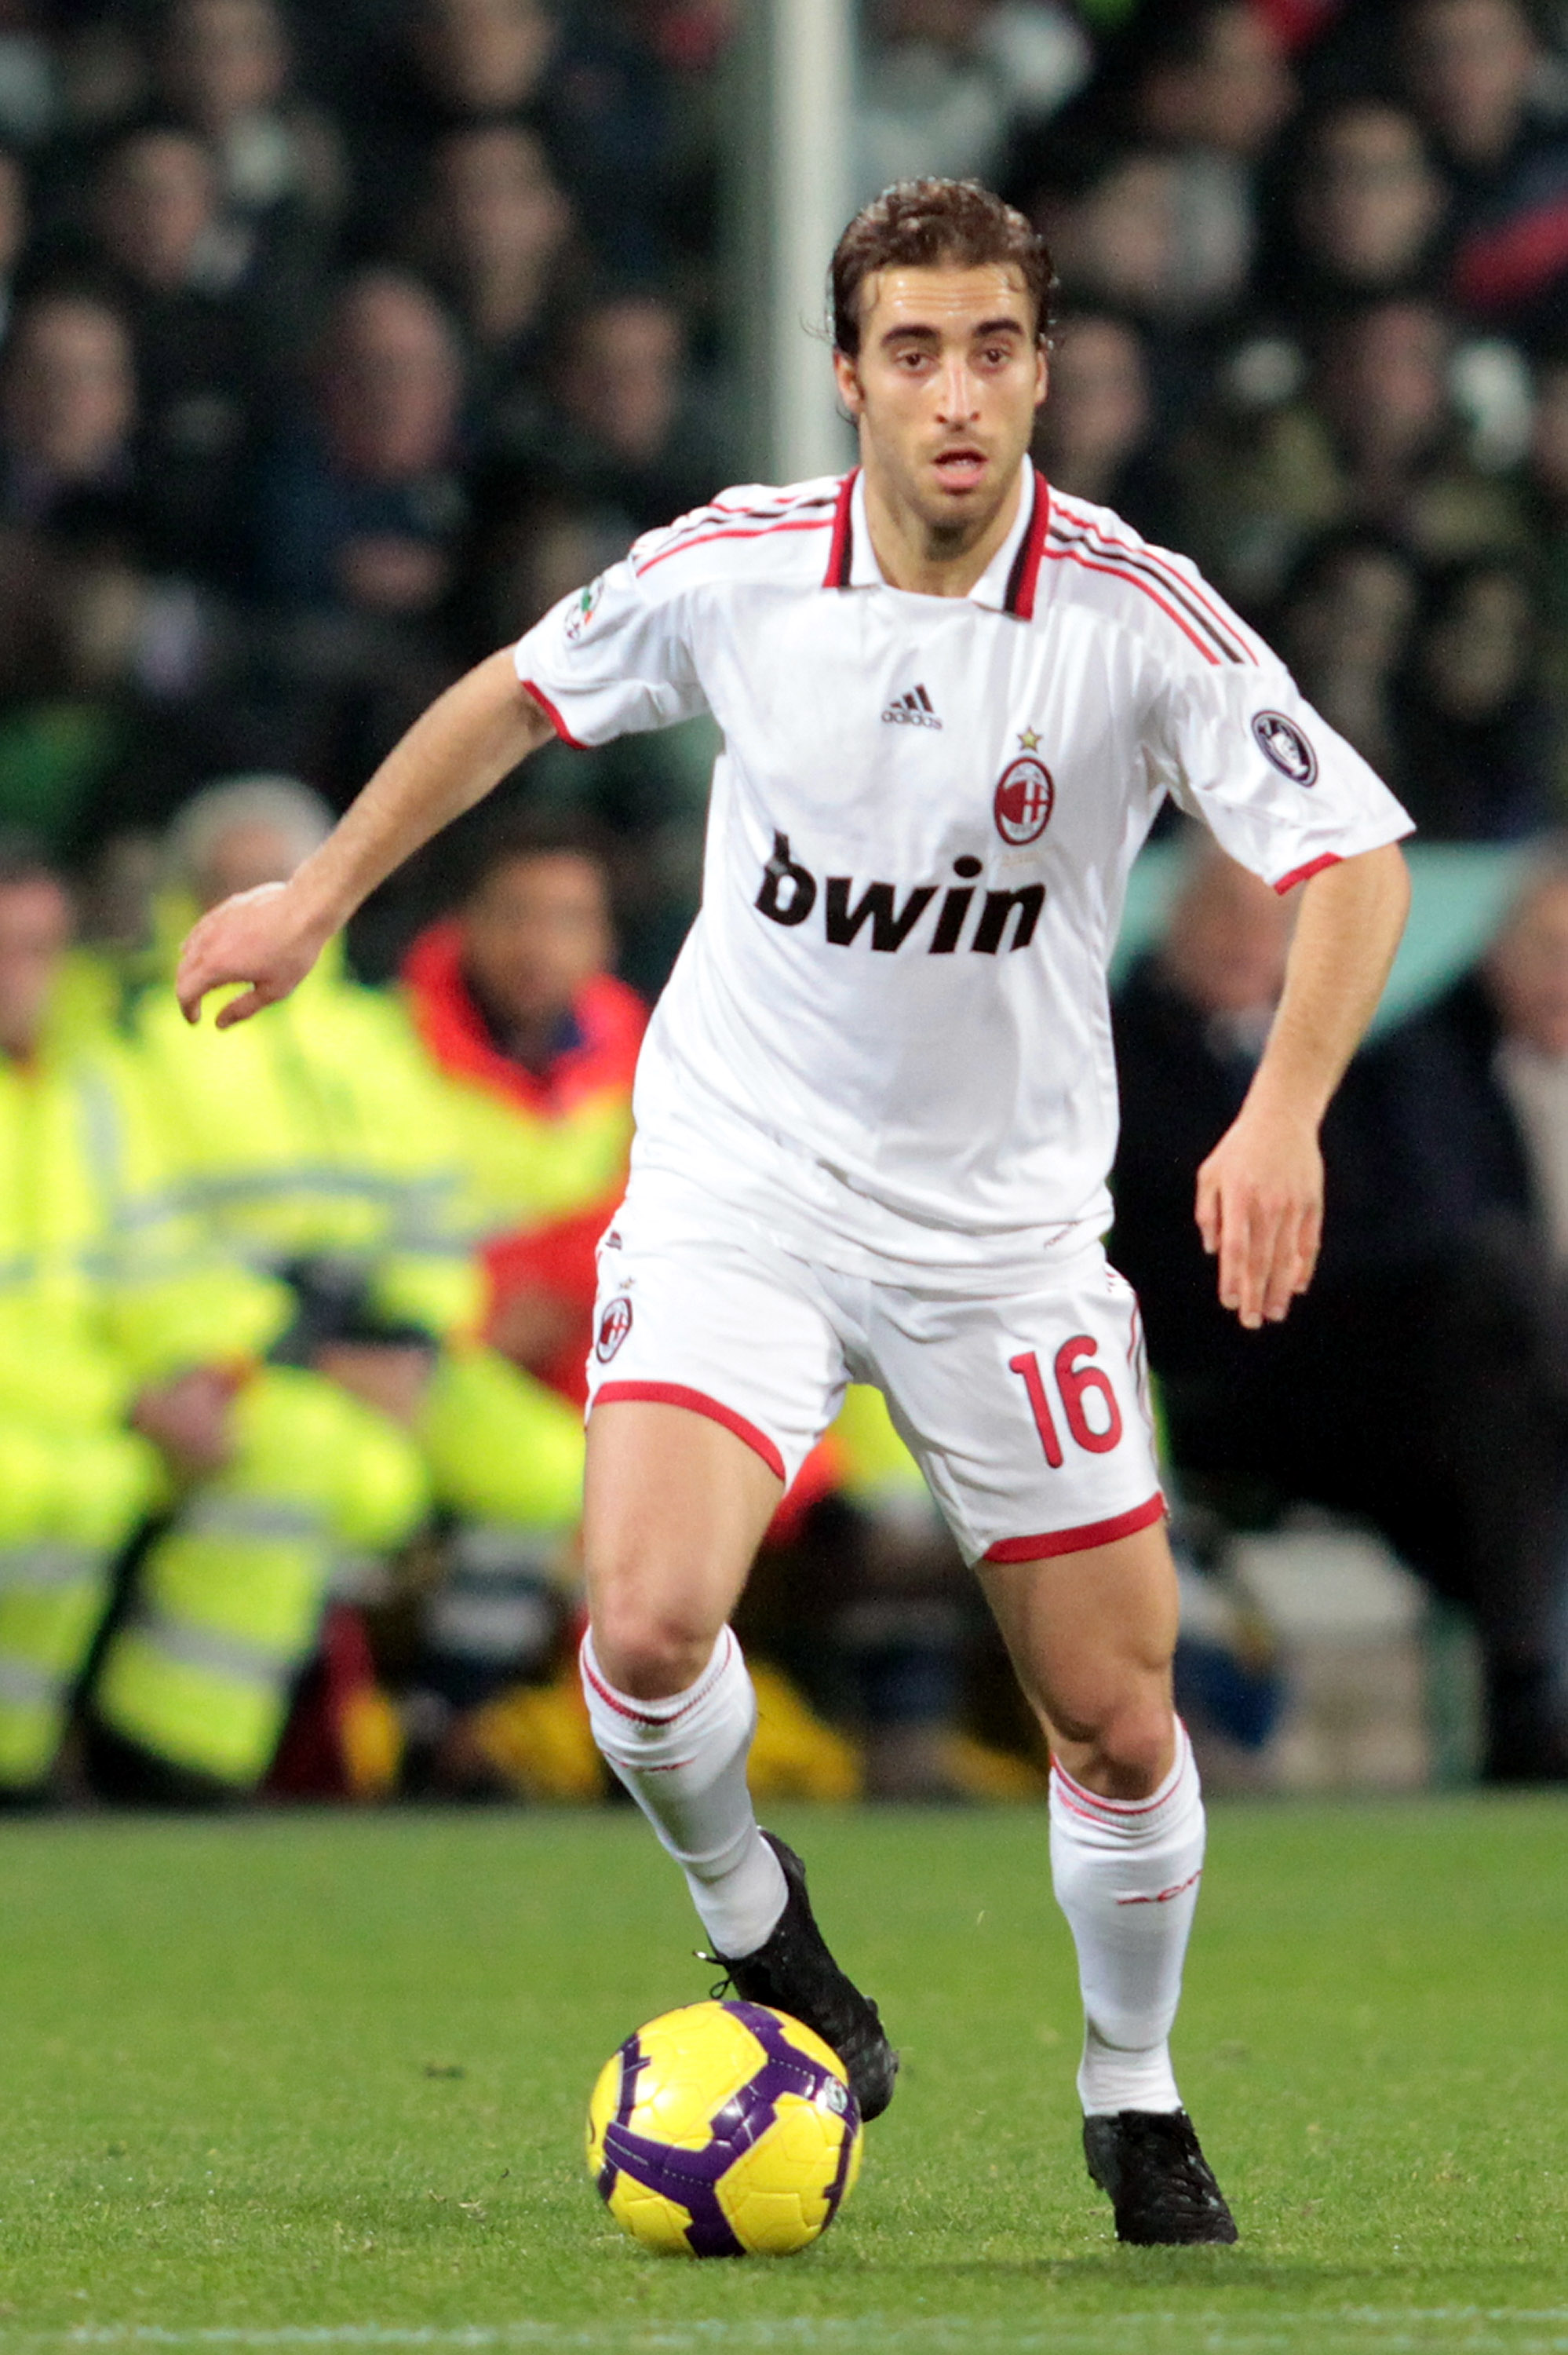 FLORENCE, ITALY - FEBRUARY 24:  Mathieu Flamini of AC Milan in action during the Serie A match between ACF Fiorentina and AC Milan at Stadio Artemio Franchi on February 24, 2010 in Florence, Italy.  (Photo by Gabriele Maltinti/Getty Images)